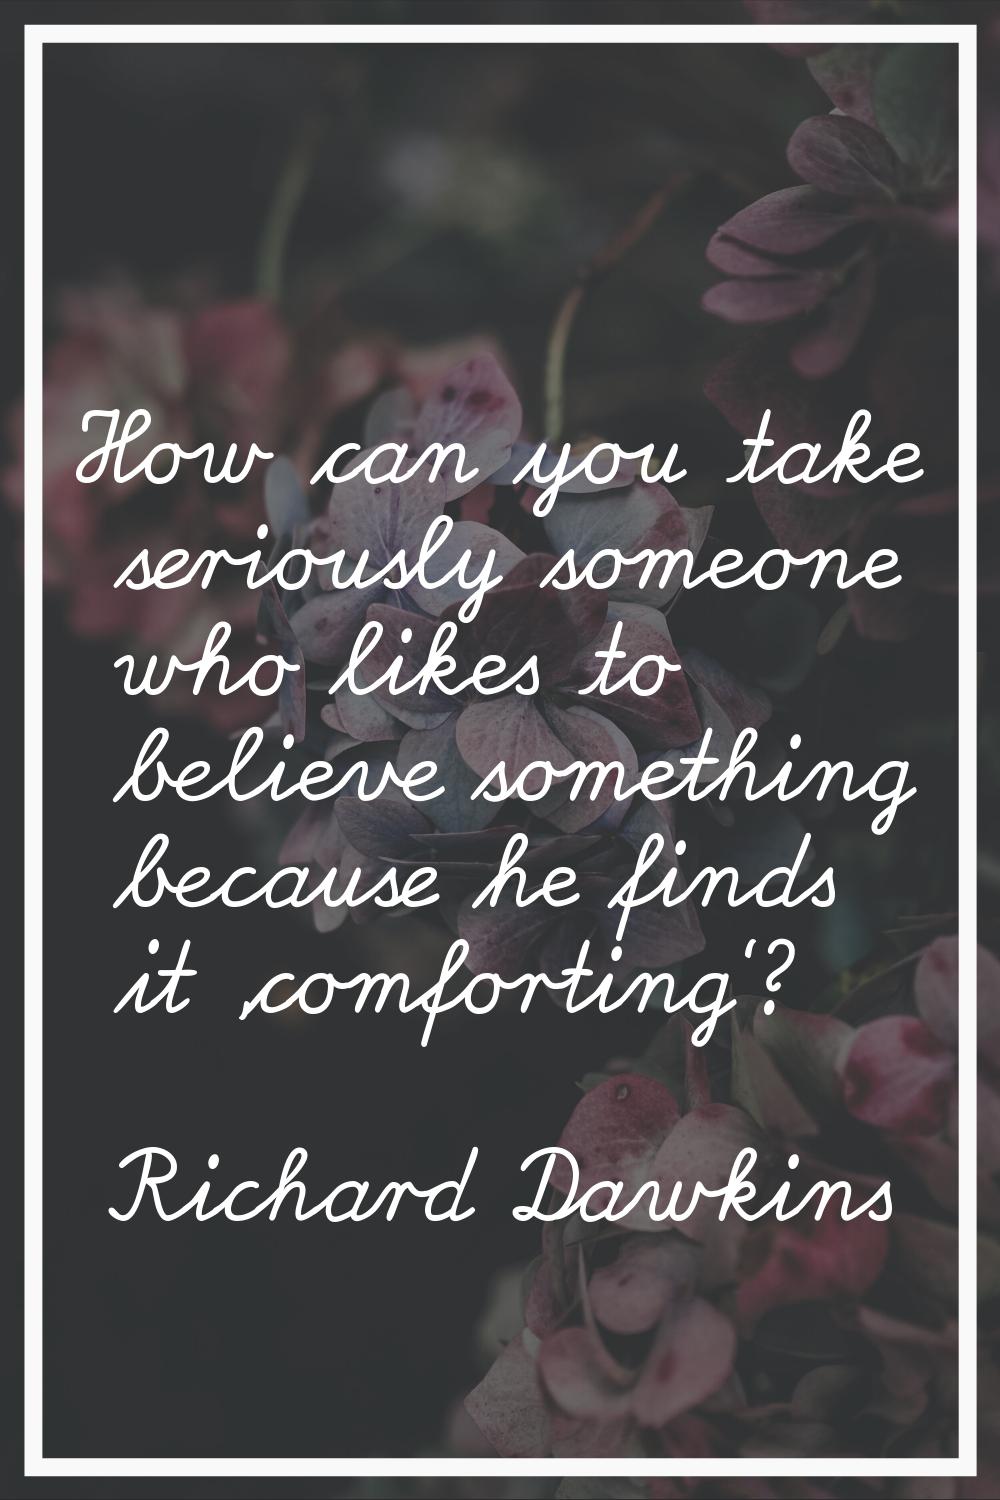 How can you take seriously someone who likes to believe something because he finds it 'comforting'?